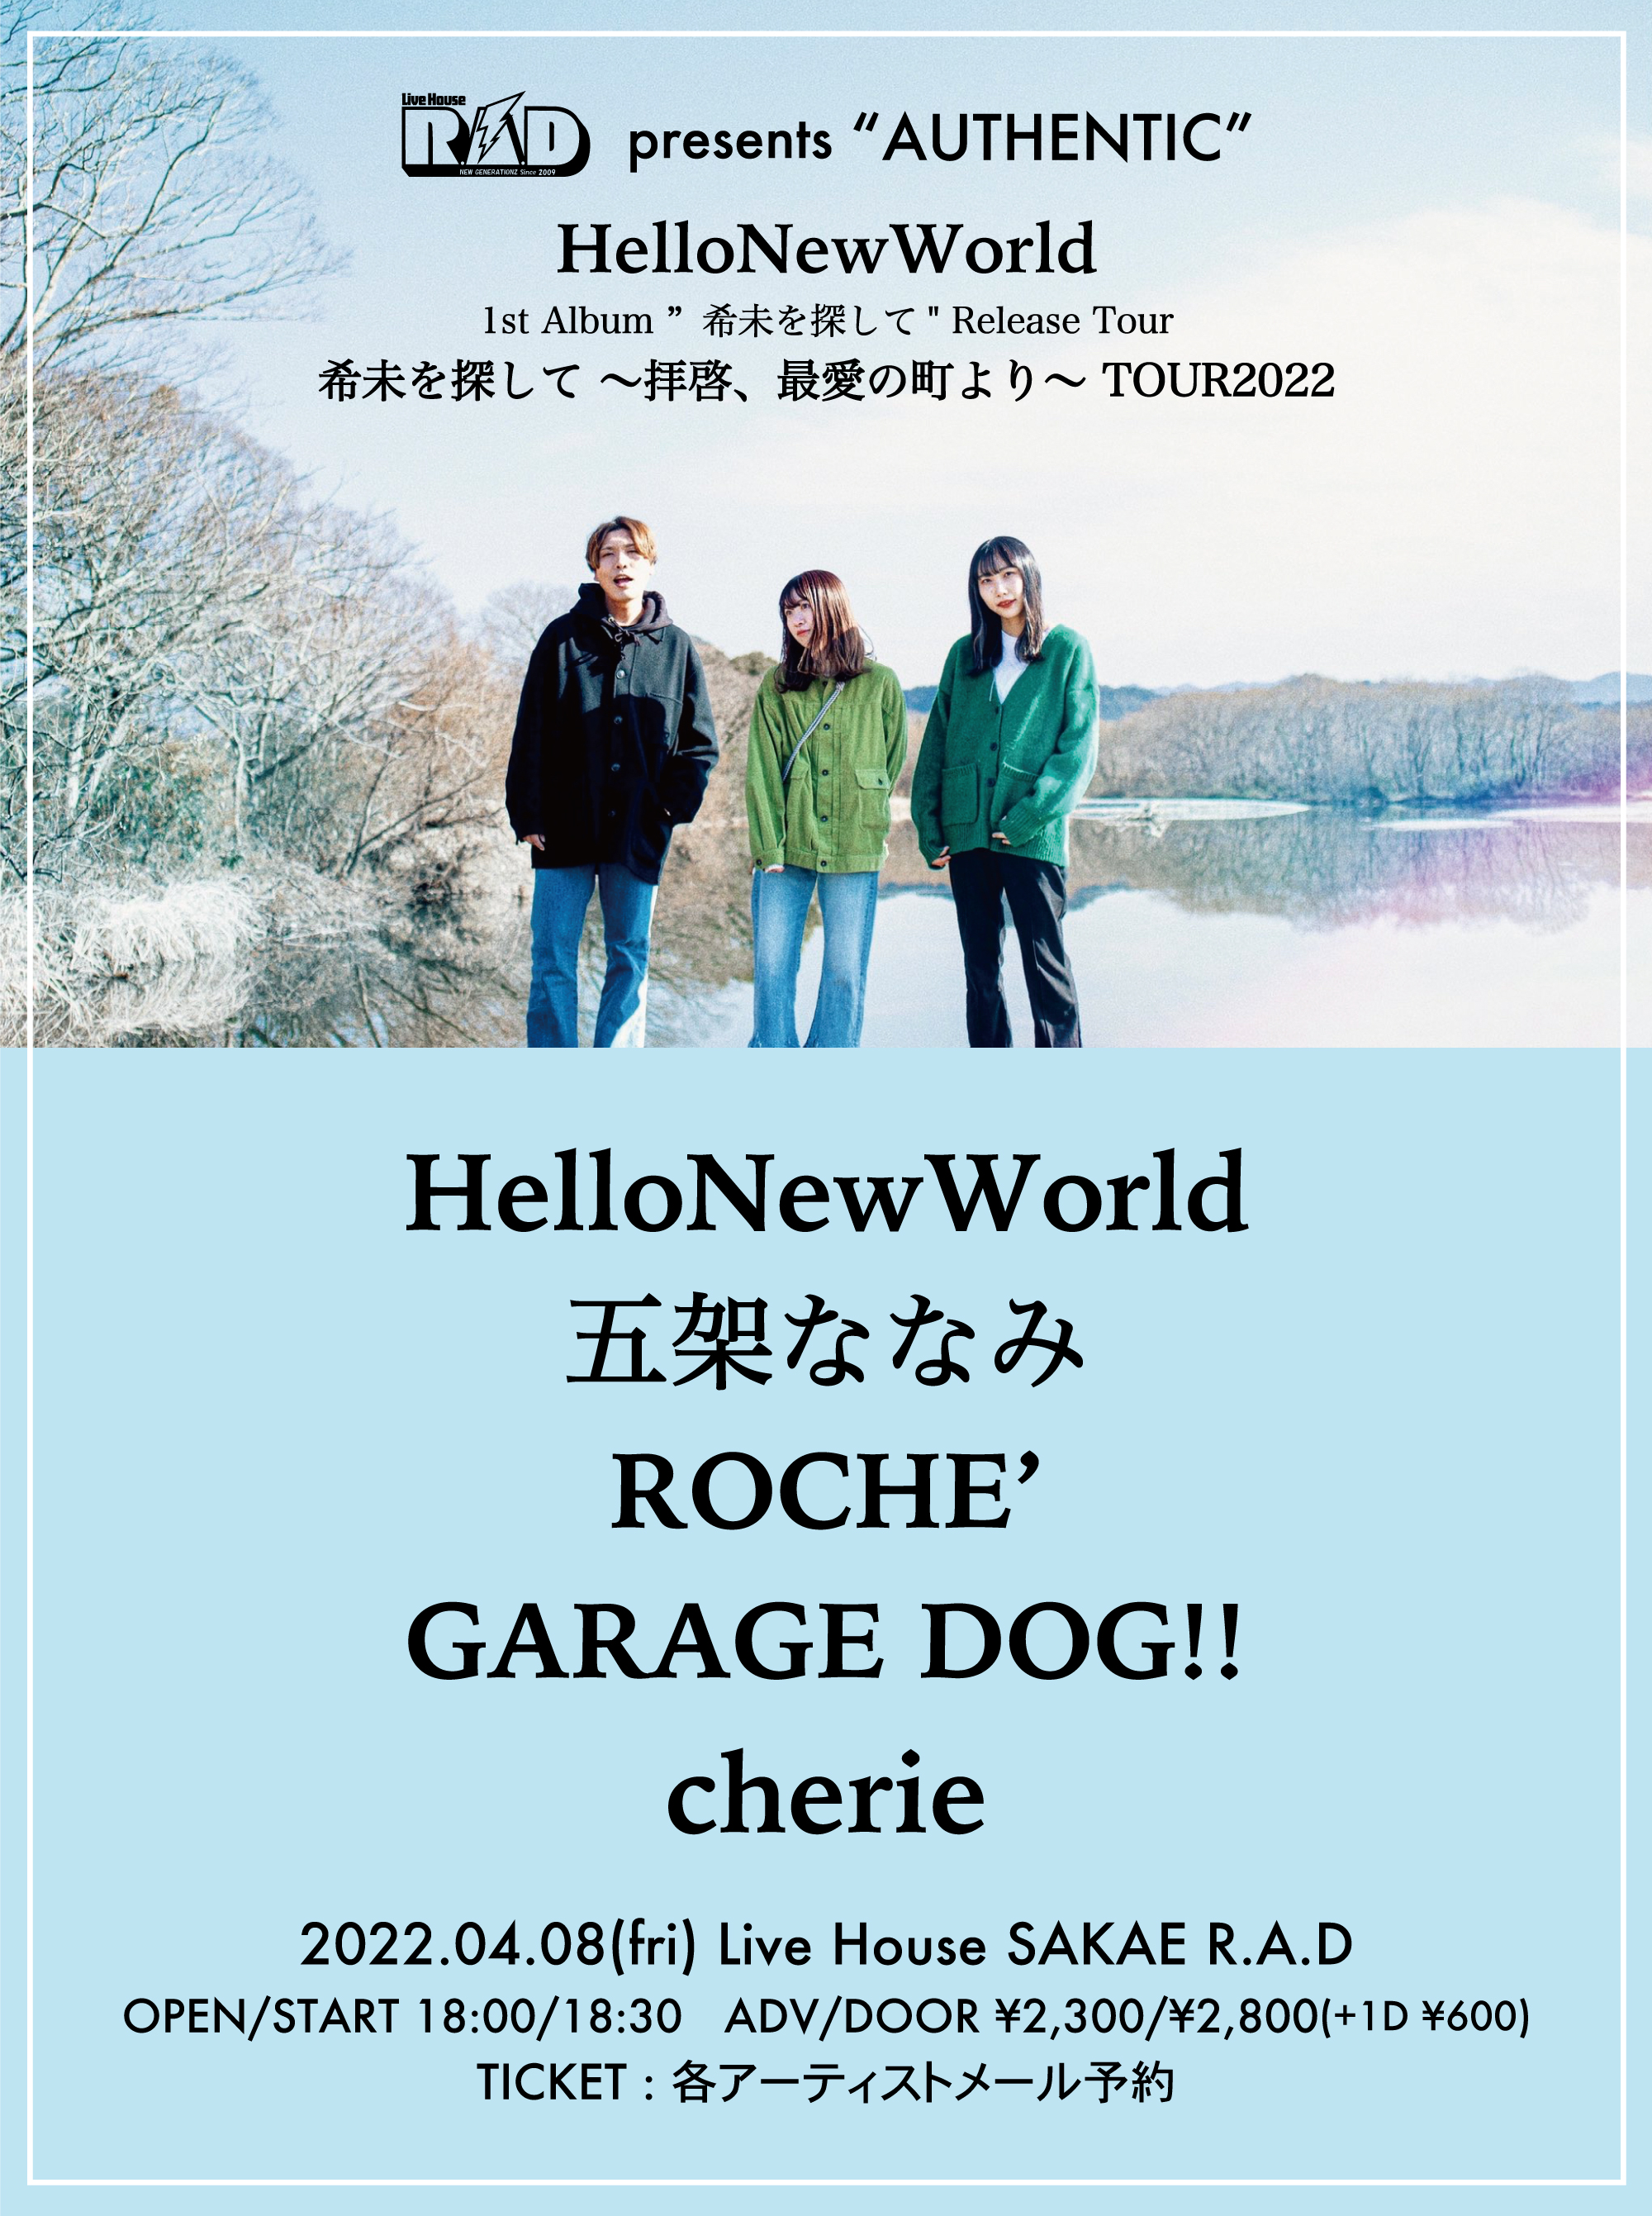 R.A.D presents "AUTHENTIC" HelloNewWorld 1st Album ”希未を探して" Release Tour 希未を探して 〜 拝啓、最愛の町より 〜 TOUR2022